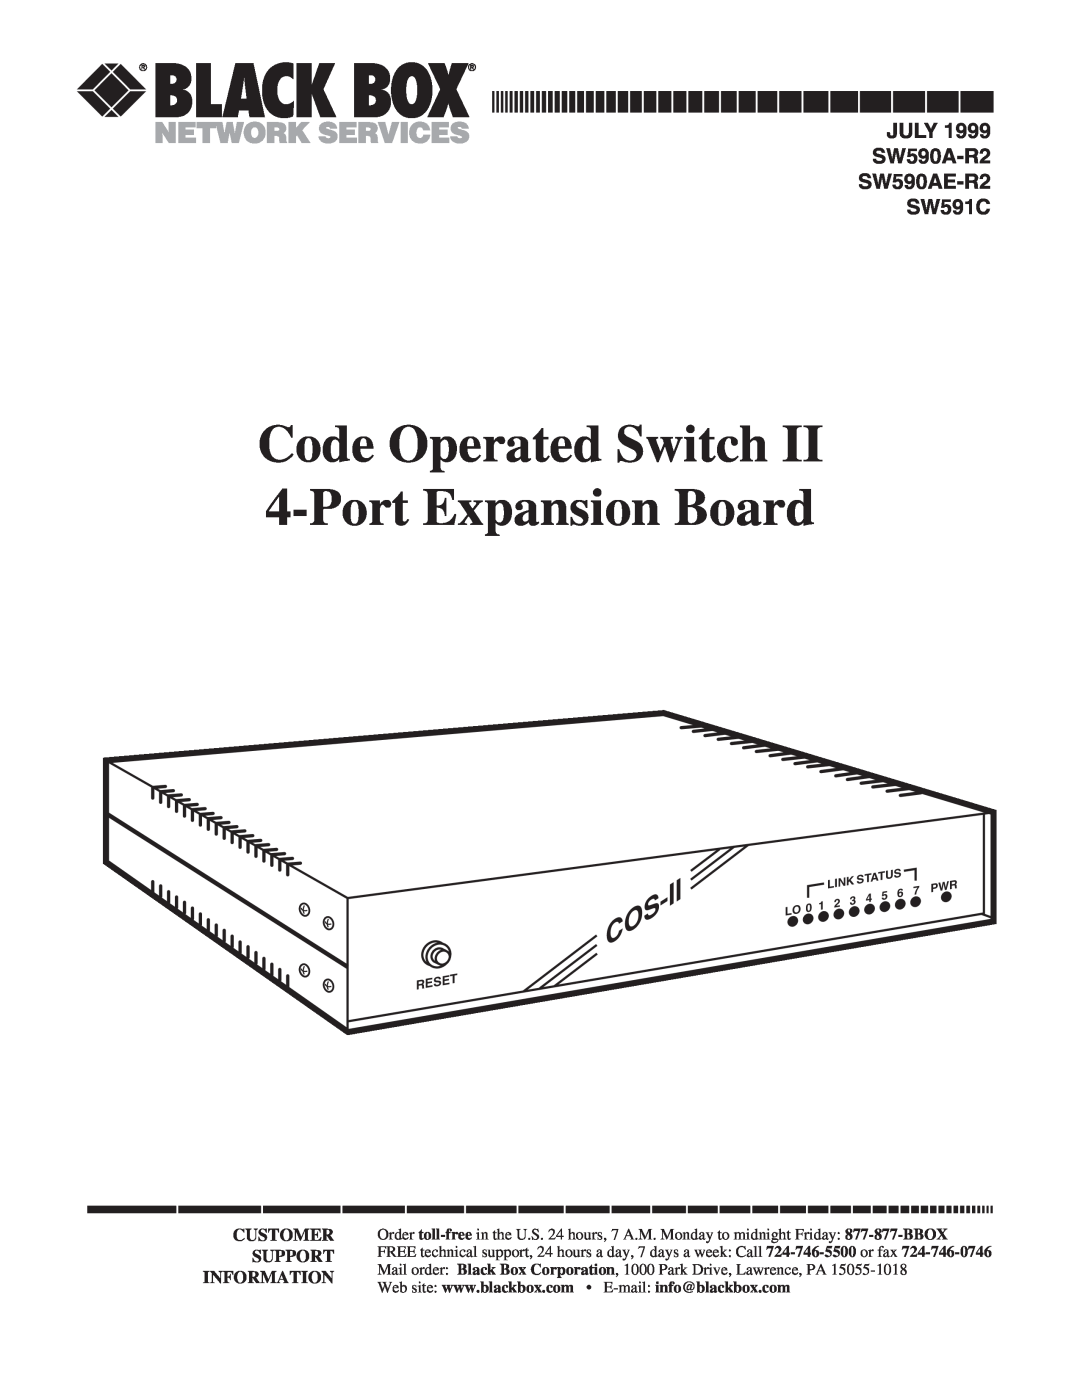 Black Box manual Code Operated Switch II 4-PortExpansion Board, JULY SW590A-R2 SW590AE-R2 SW591C, Customer, Support 